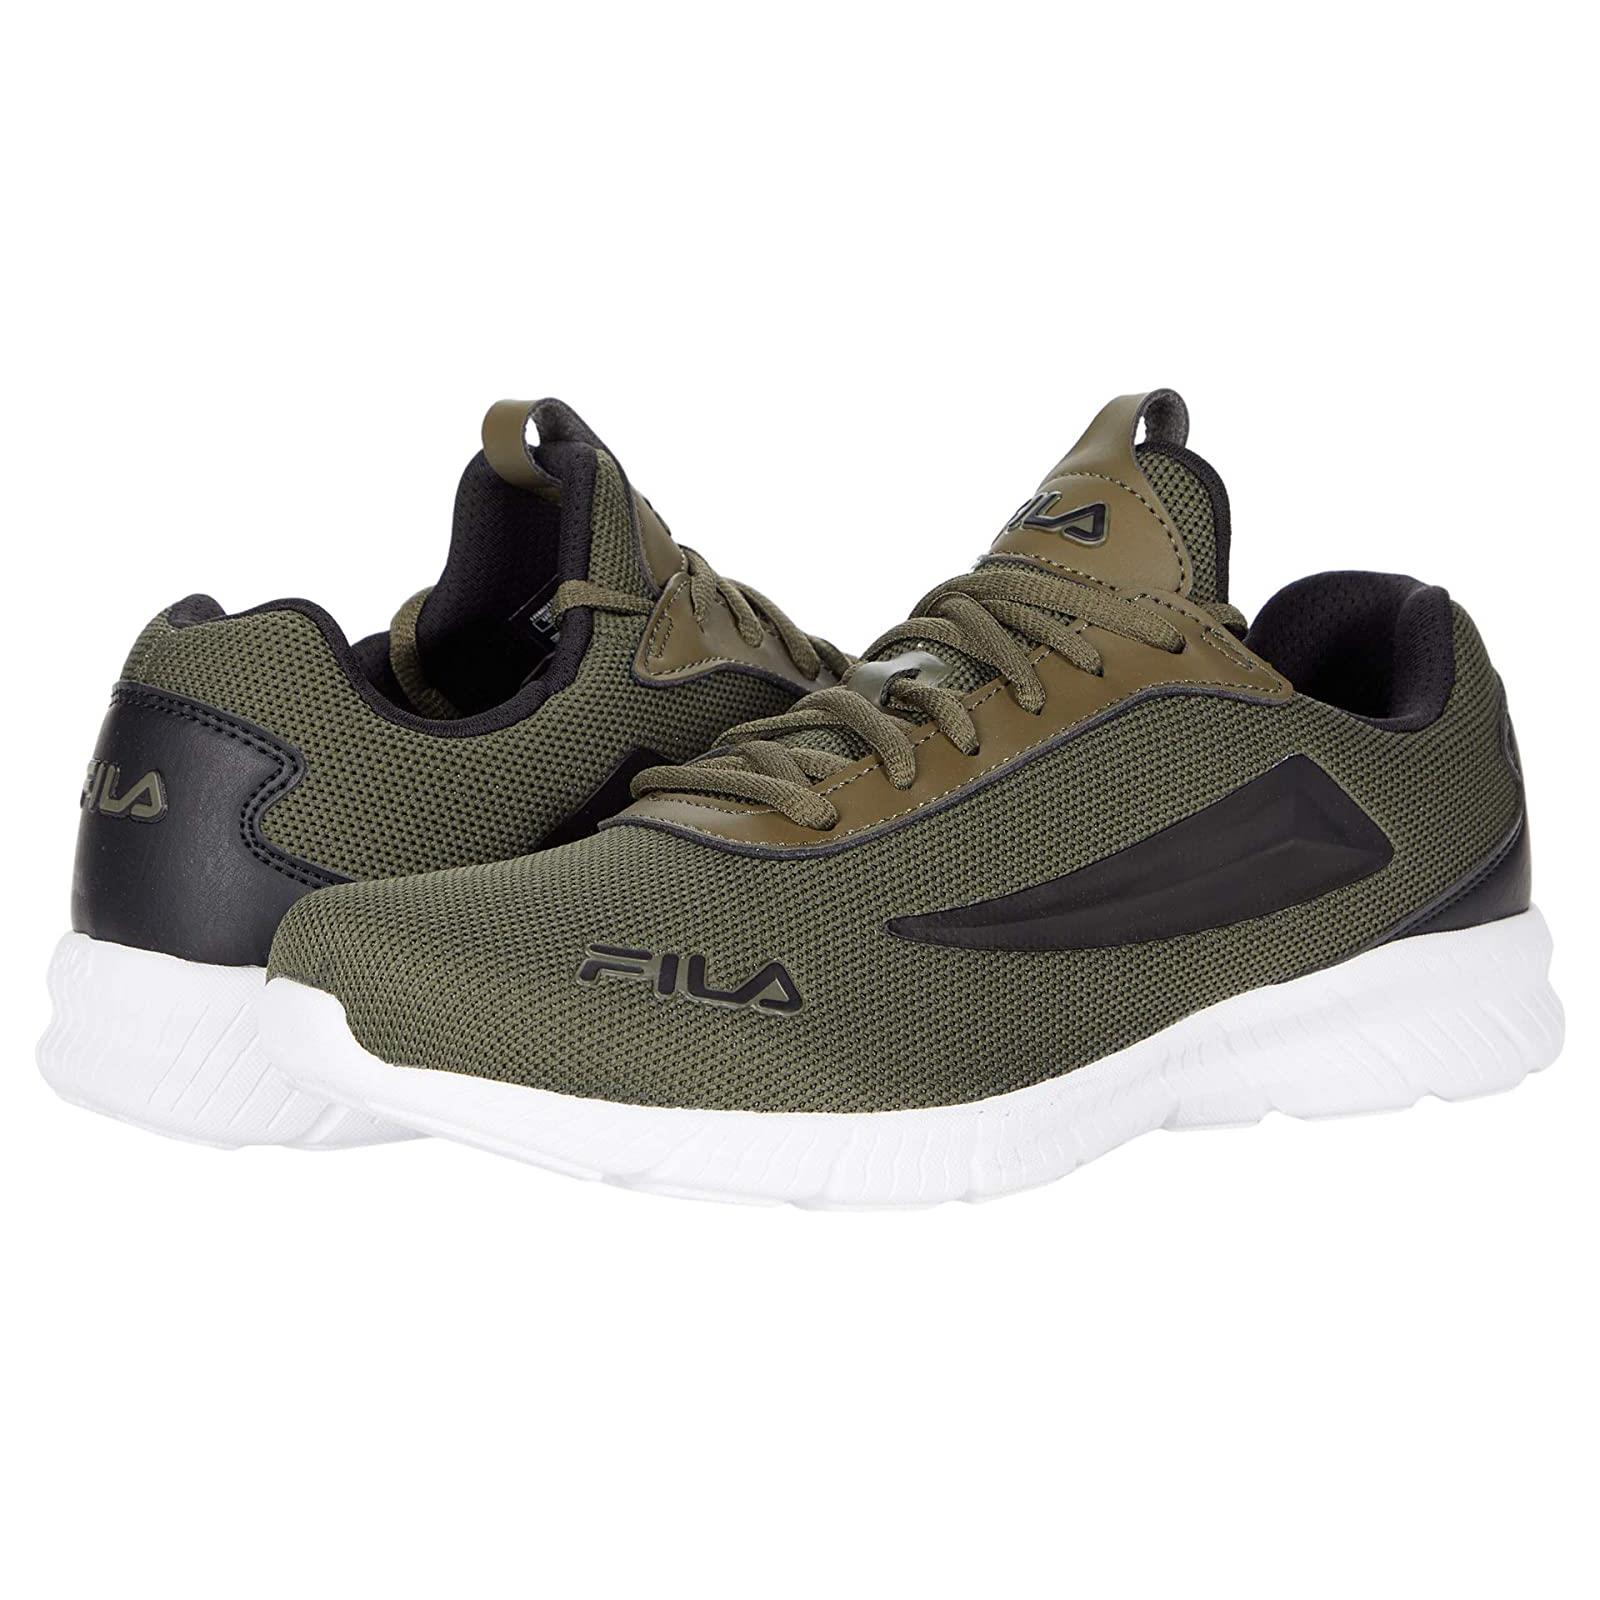 Man`s Sneakers Athletic Shoes Fila Oxidation Dark Olive/Black/White